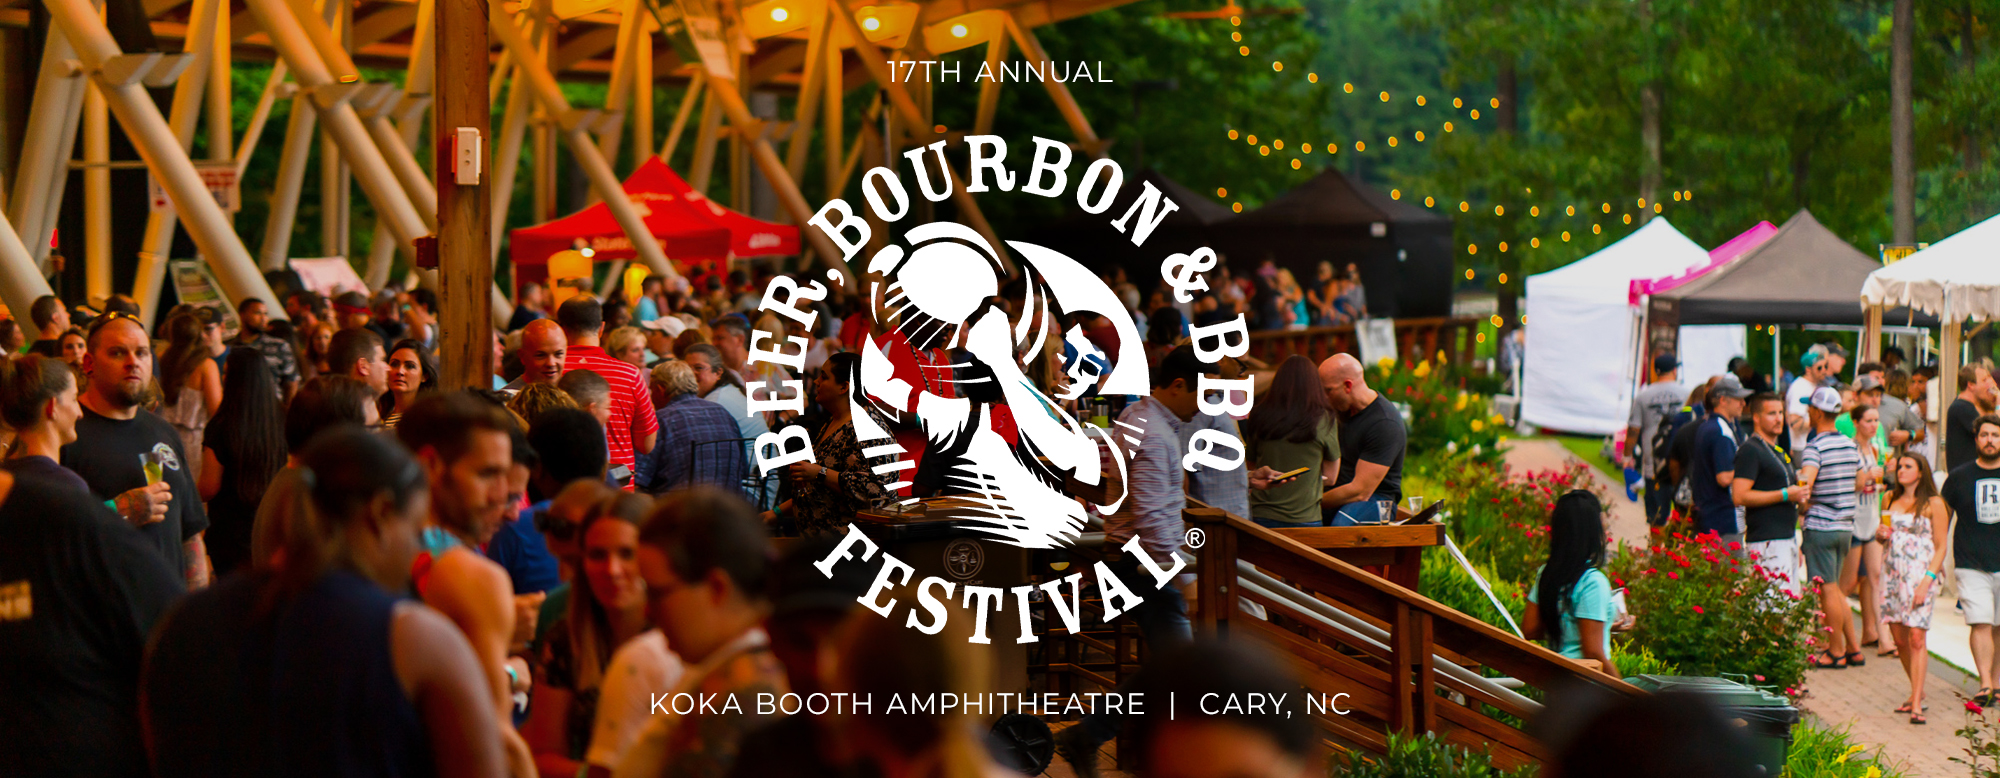 Beer, Bourbon and BBQ Festival: Cary